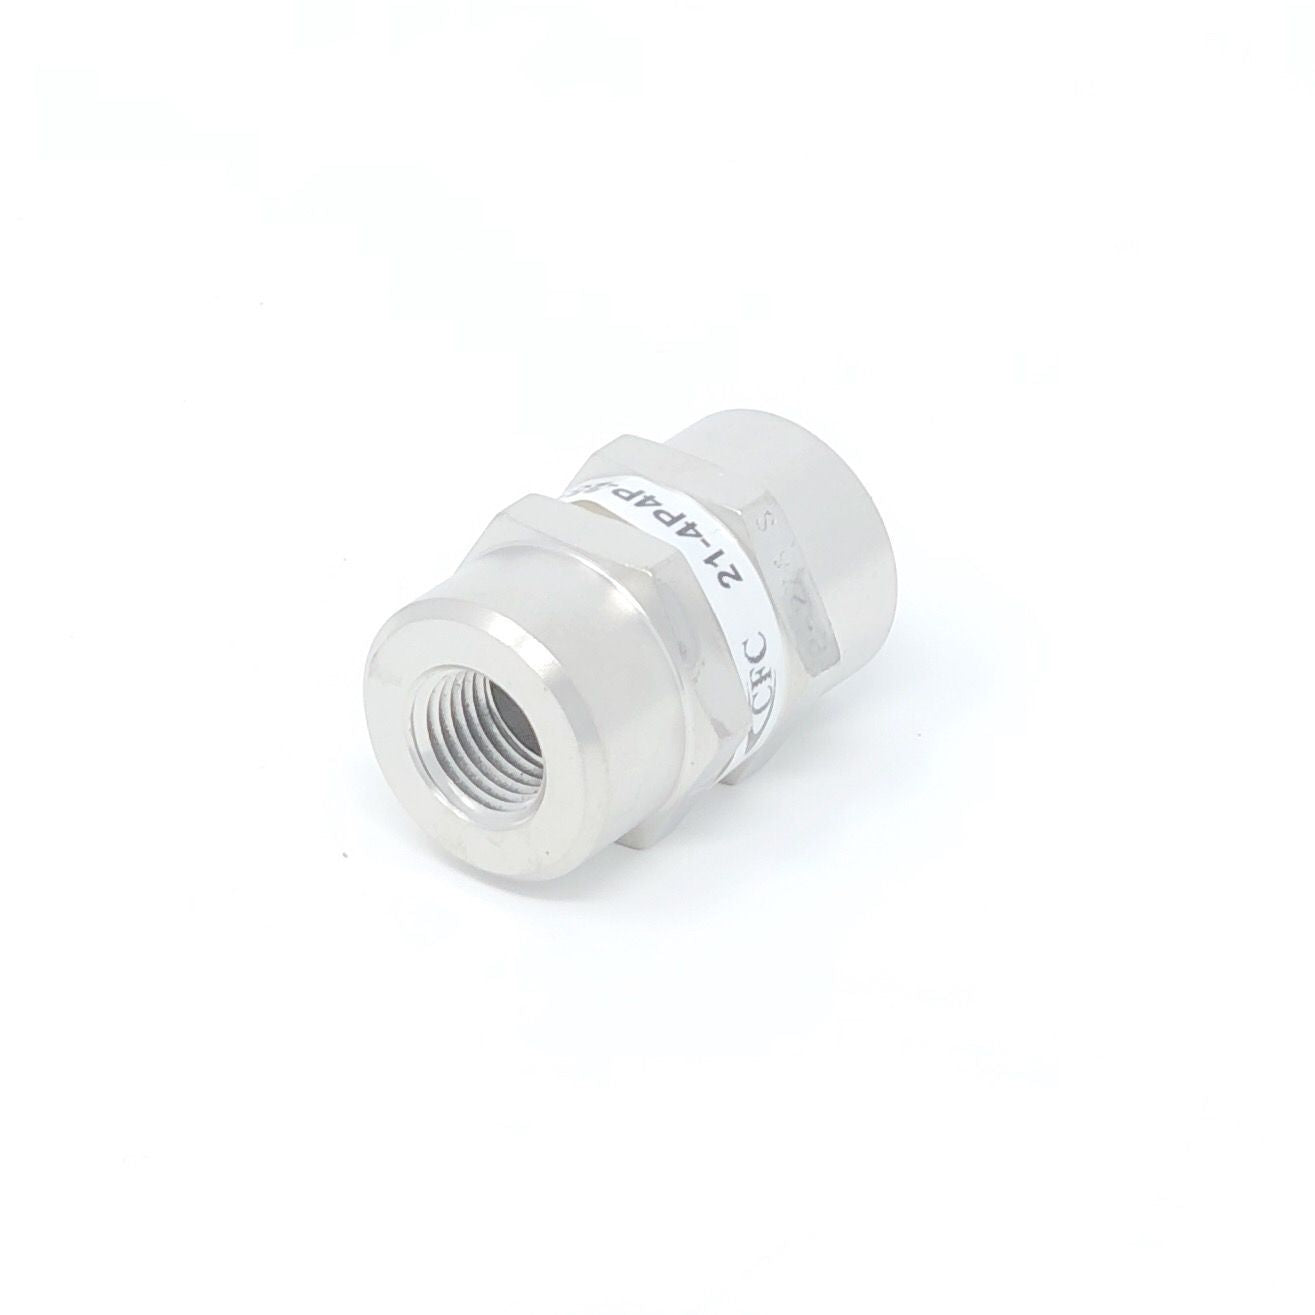 21-12M12M-40S : Chase High Pressure Inline Filter, 3000psi, #12 SAE (3/4"), 40 Micron, No Visual Indicator, With Bypass